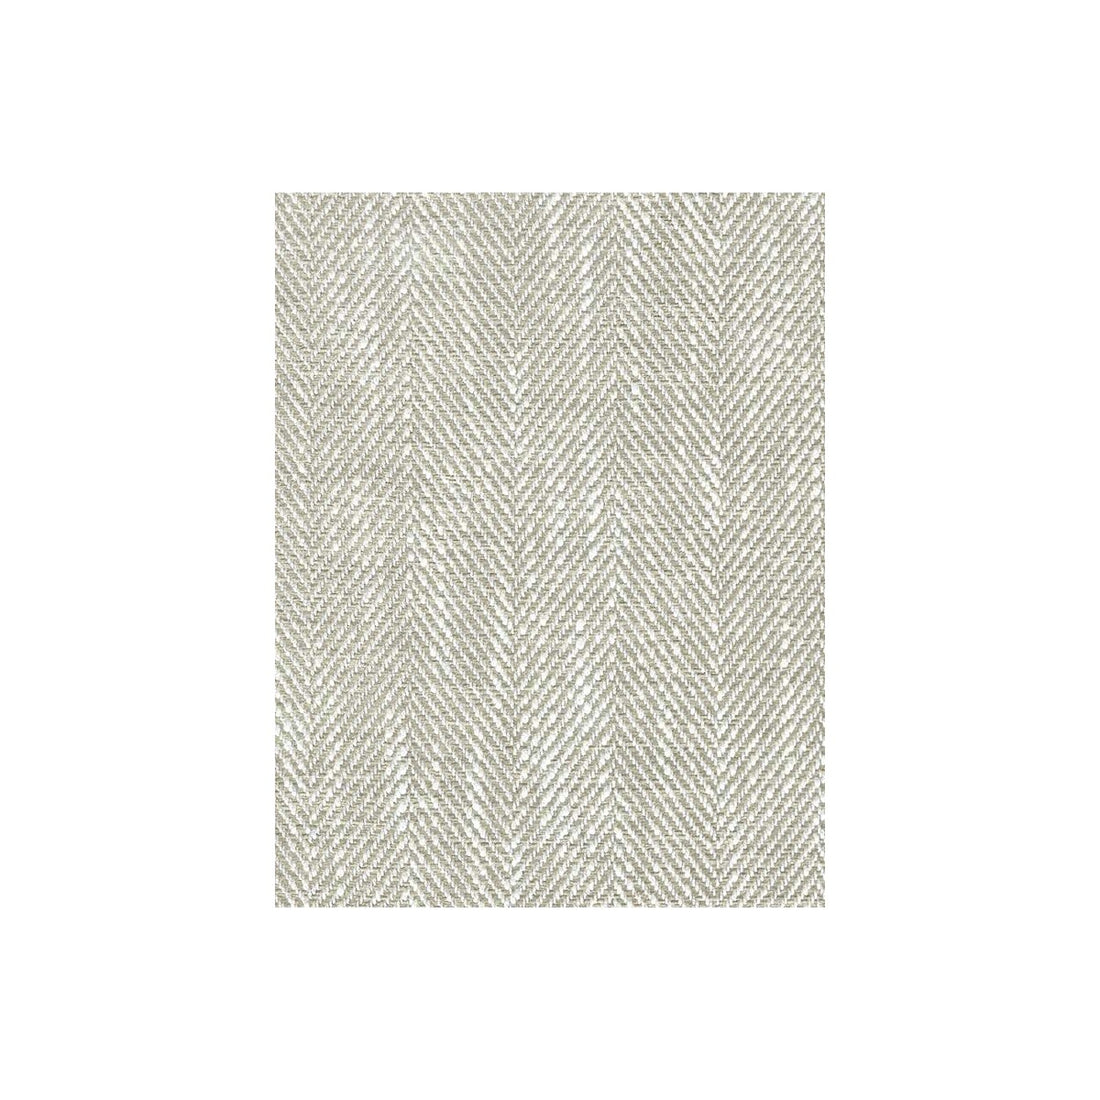 Summit fabric in neutral color - pattern AM100147.16.0 - by Kravet Couture in the Andrew Martin Portofino collection